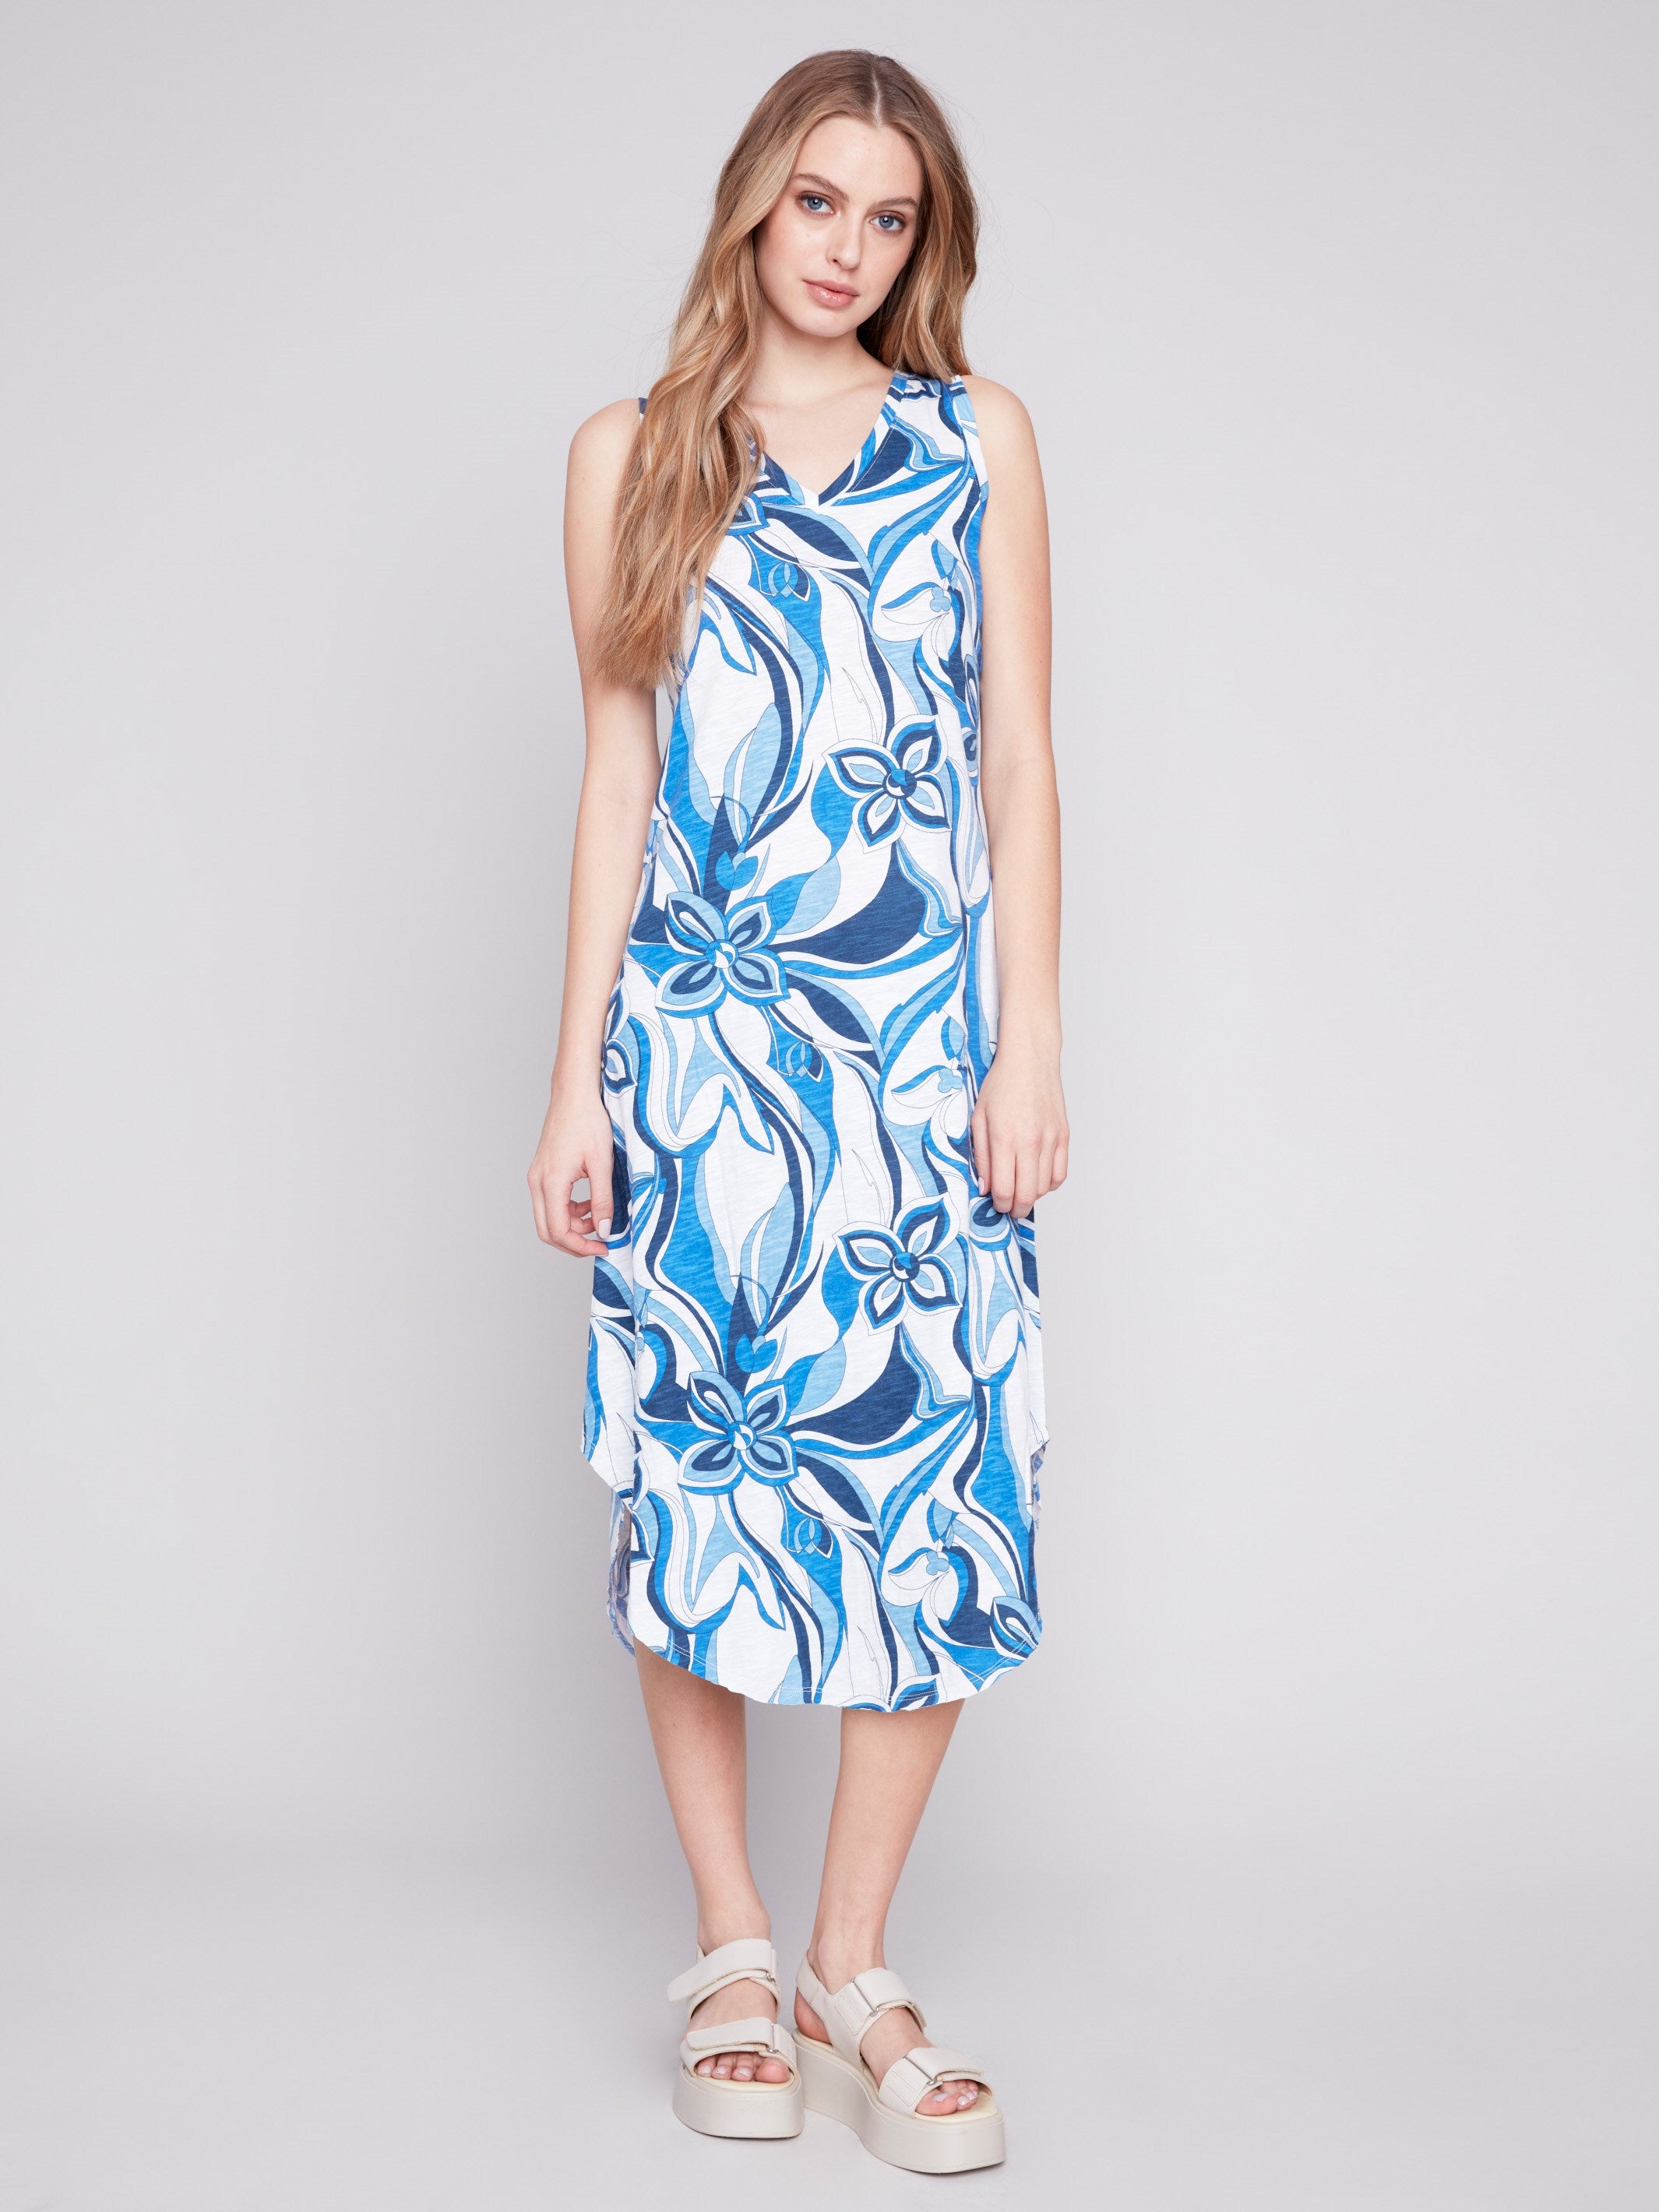 Printed Sleeveless Cotton Dress - Sky - Charlie B Collection Canada - Image 4